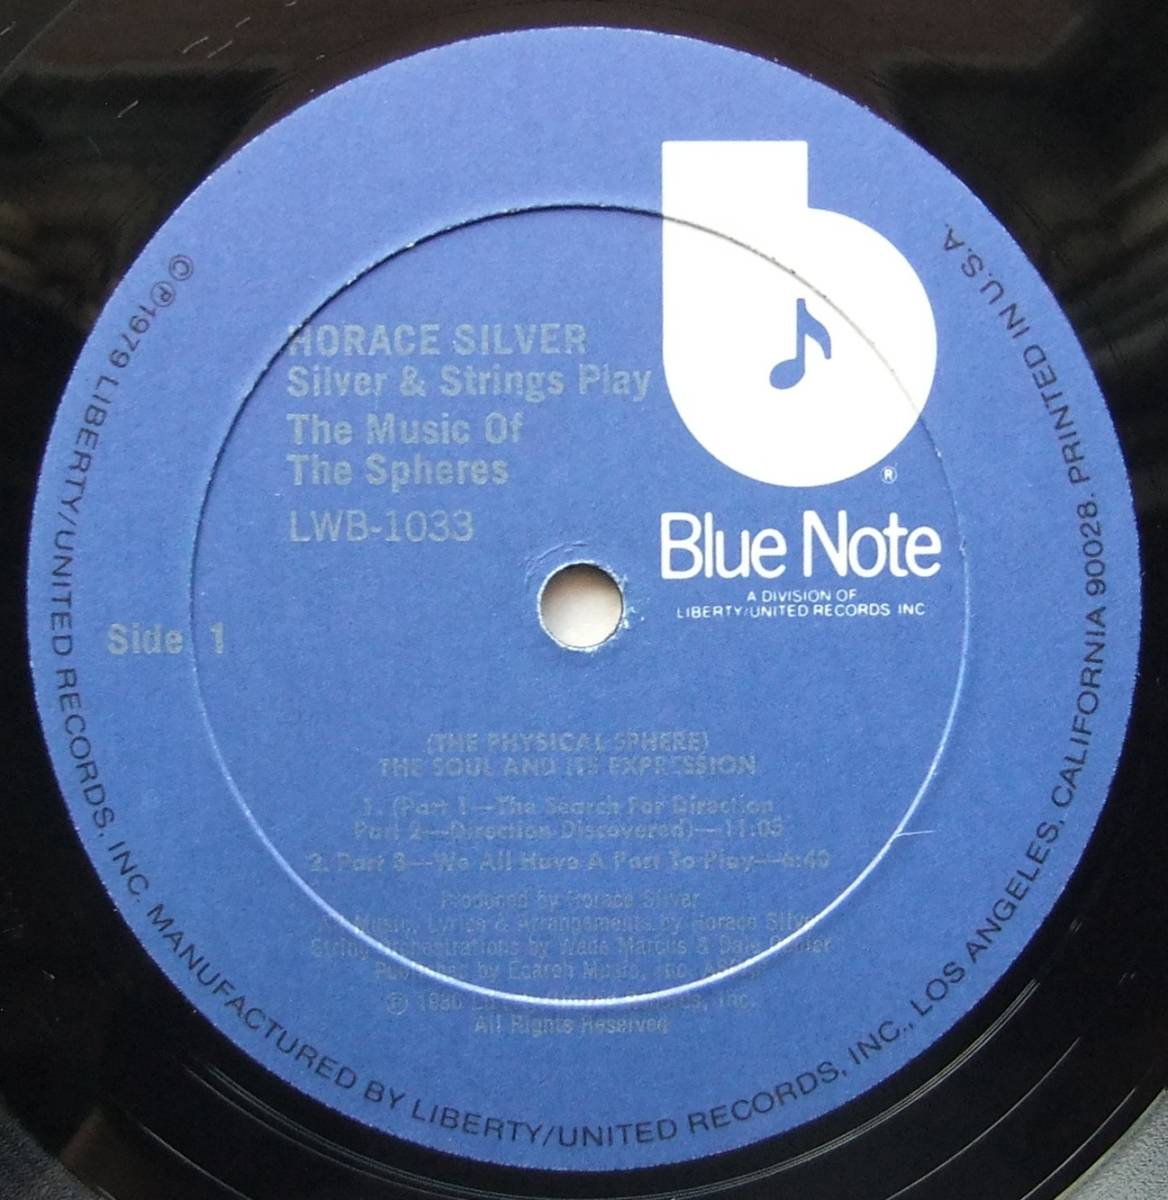 ◆ HORACE SILVER / Silver 'N Play The Music of the Spheres (2 LP) ◆ Blue Note LWB-1033 ◆ V_画像5